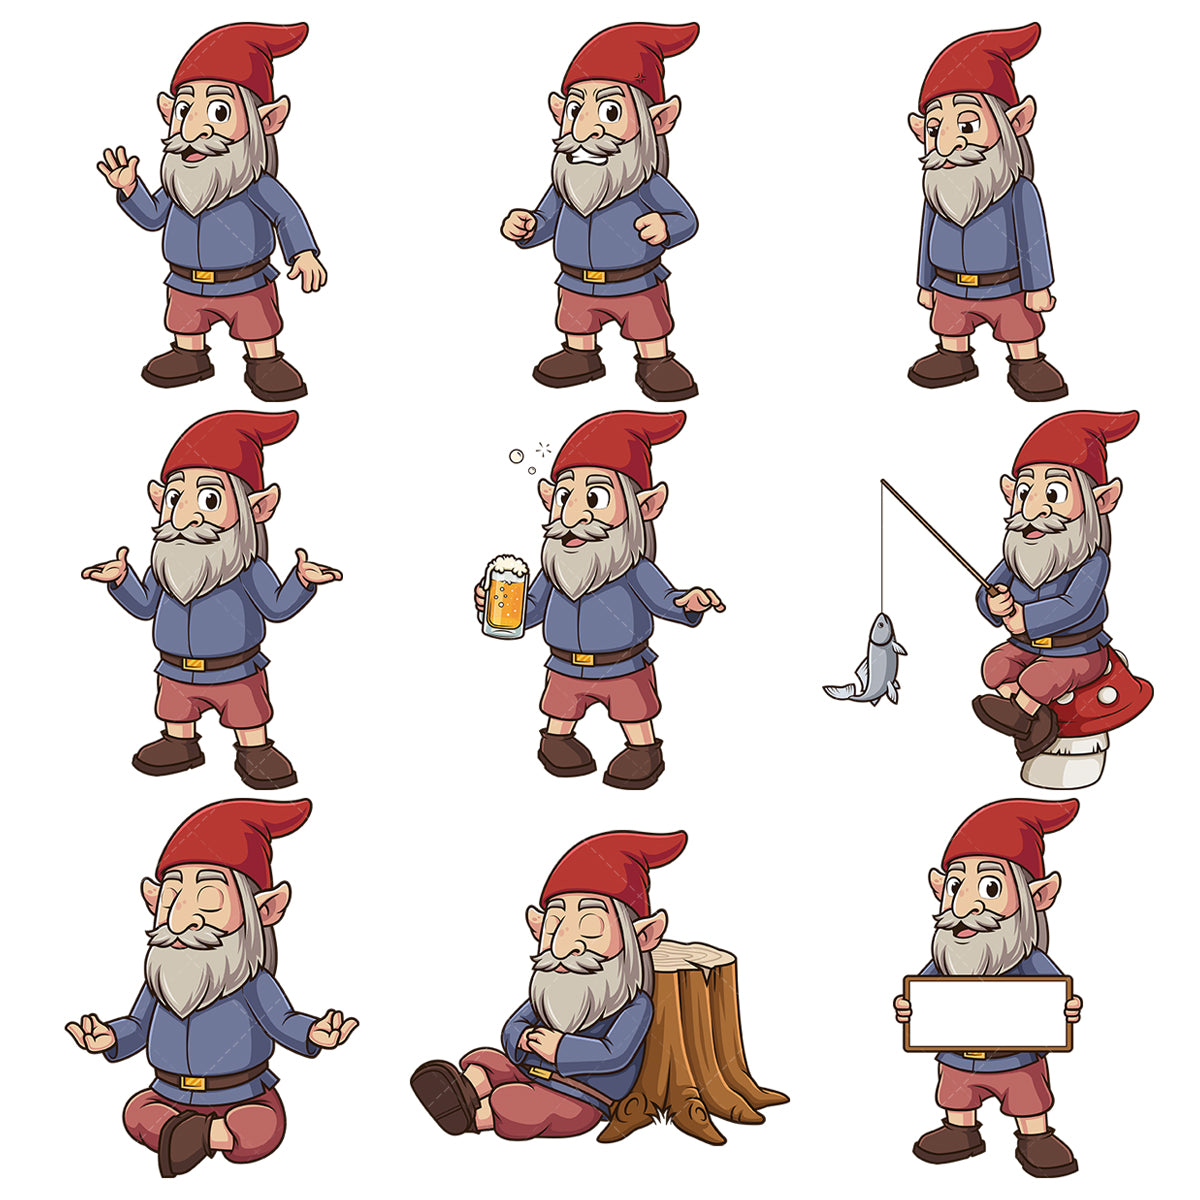 A bundle of 9 royalty-free stock vector illustrations of a wise old gnome.